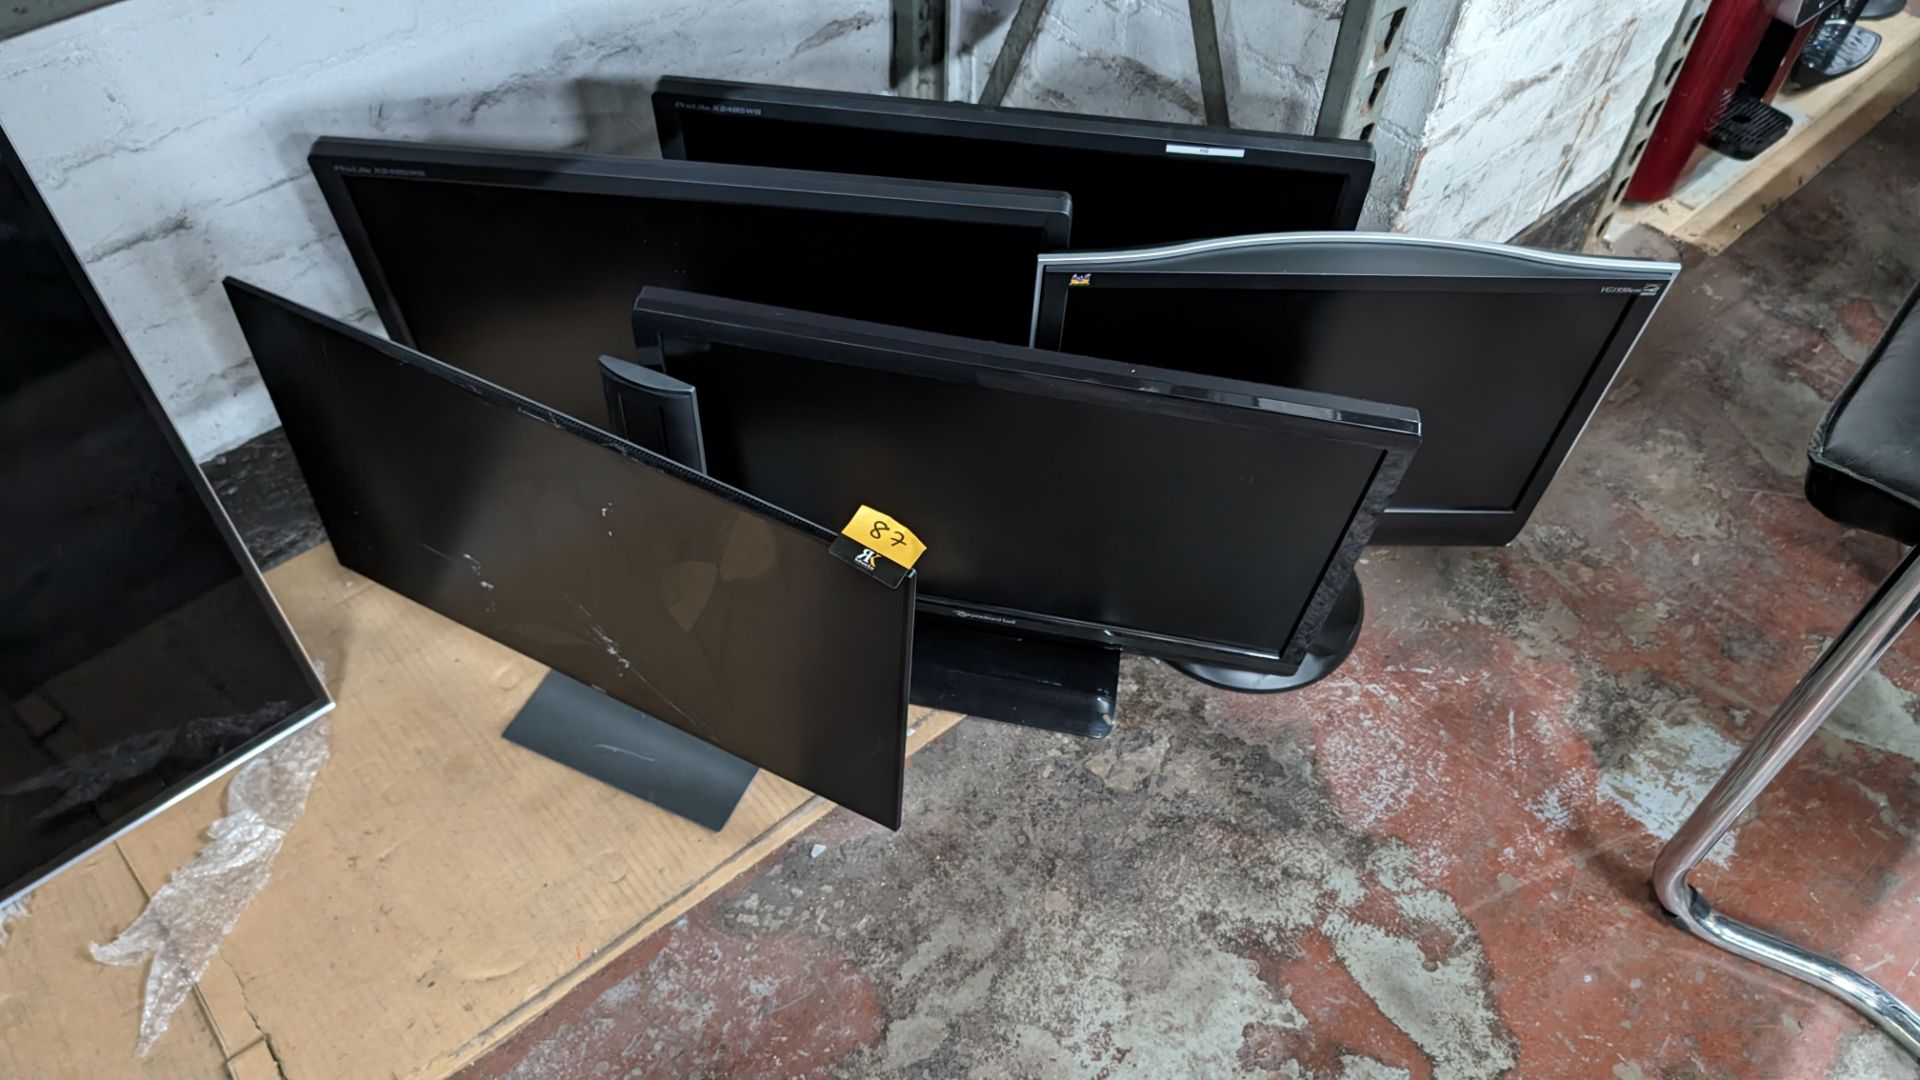 5 off assorted widescreen monitors each on desktop stand (damaged)